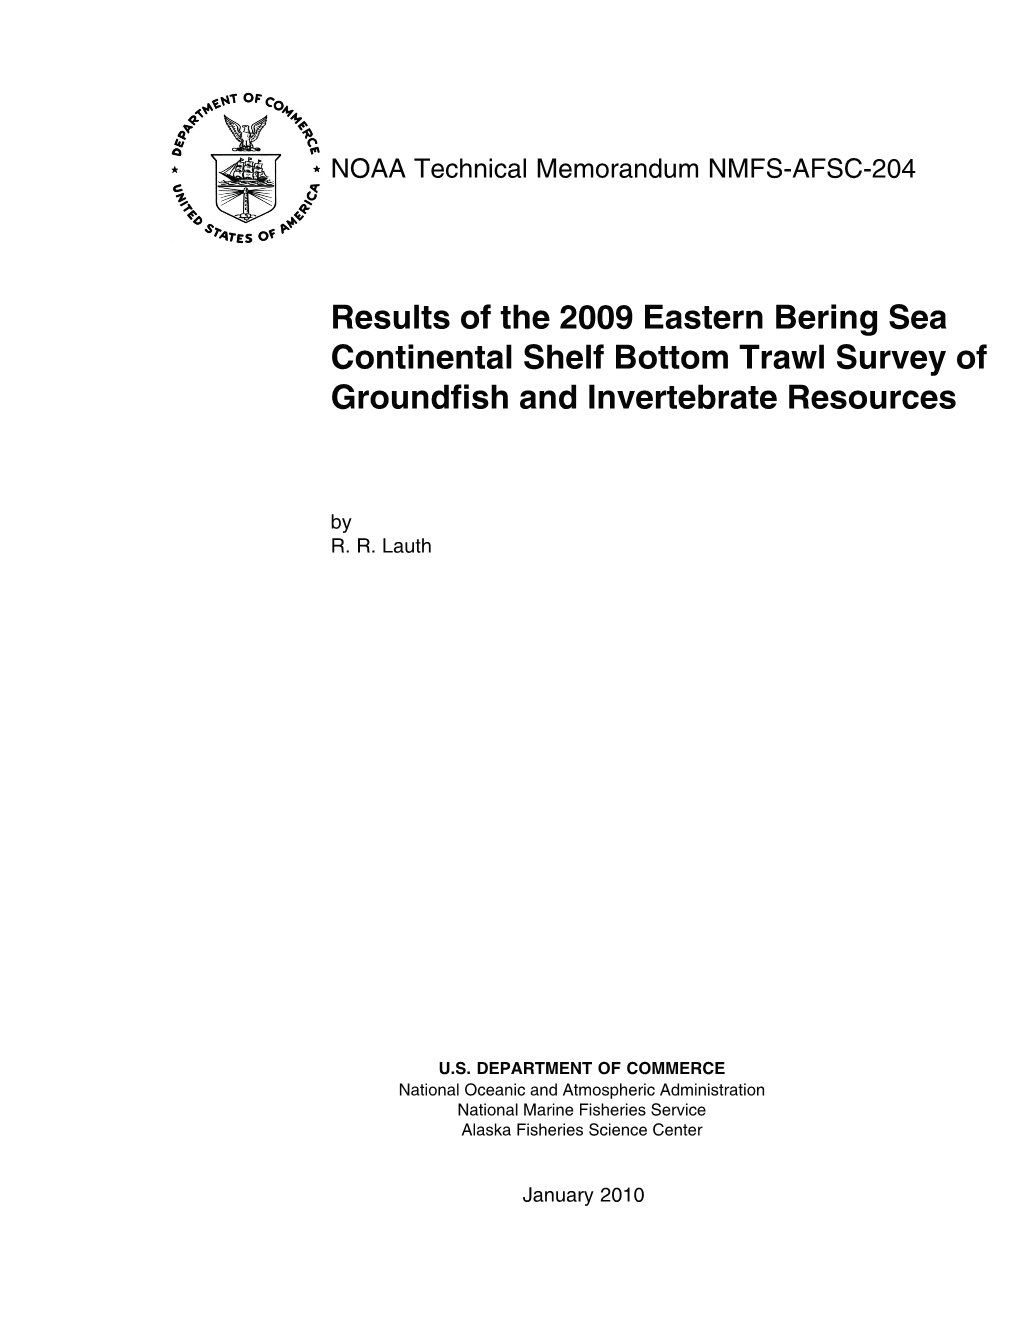 Results of the 2009 Eastern Bering Sea Continental Shelf Bottom Trawl Survey of Groundfish and Invertebrate Resources